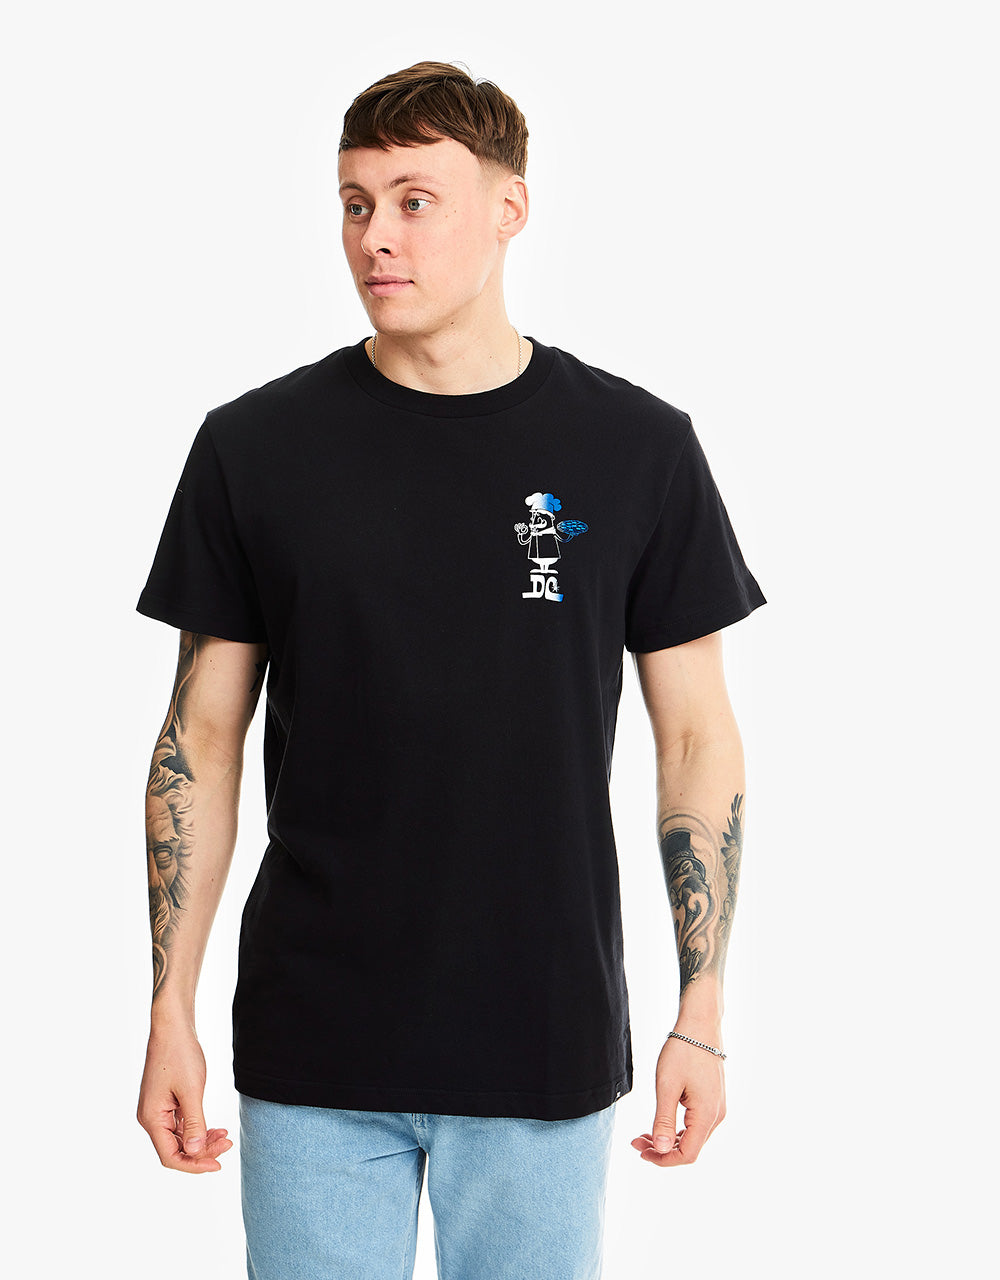 DC No More Dine In T-Shirt - Black